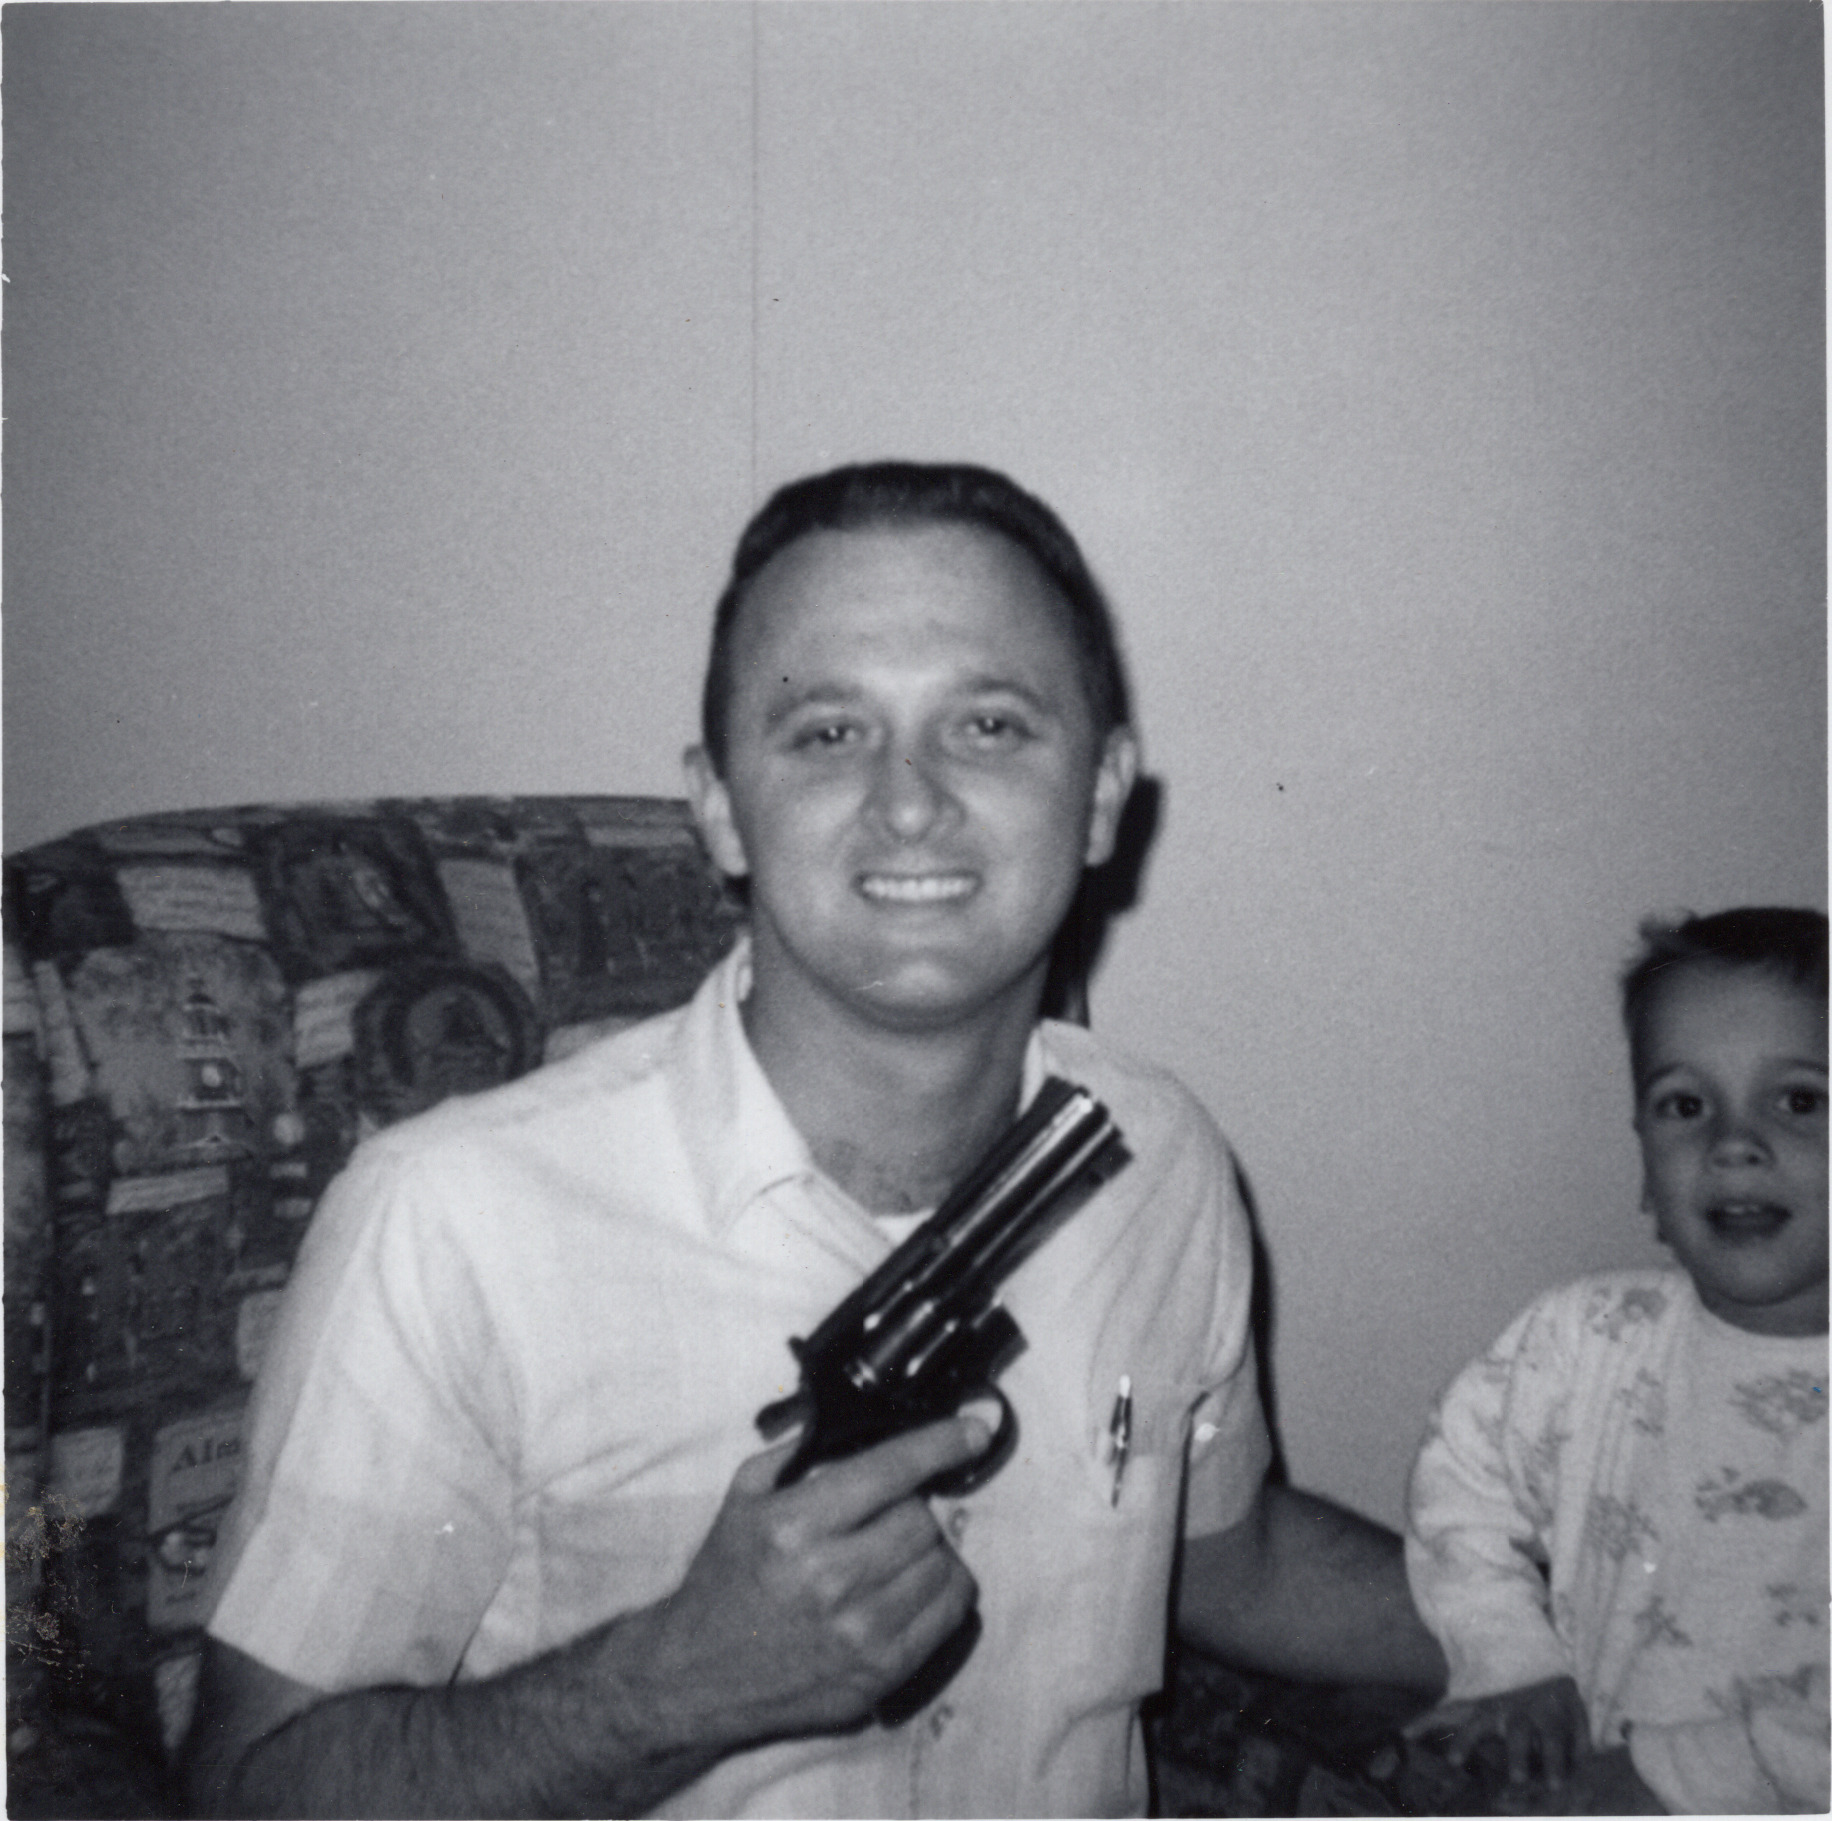 Dad with New Gun